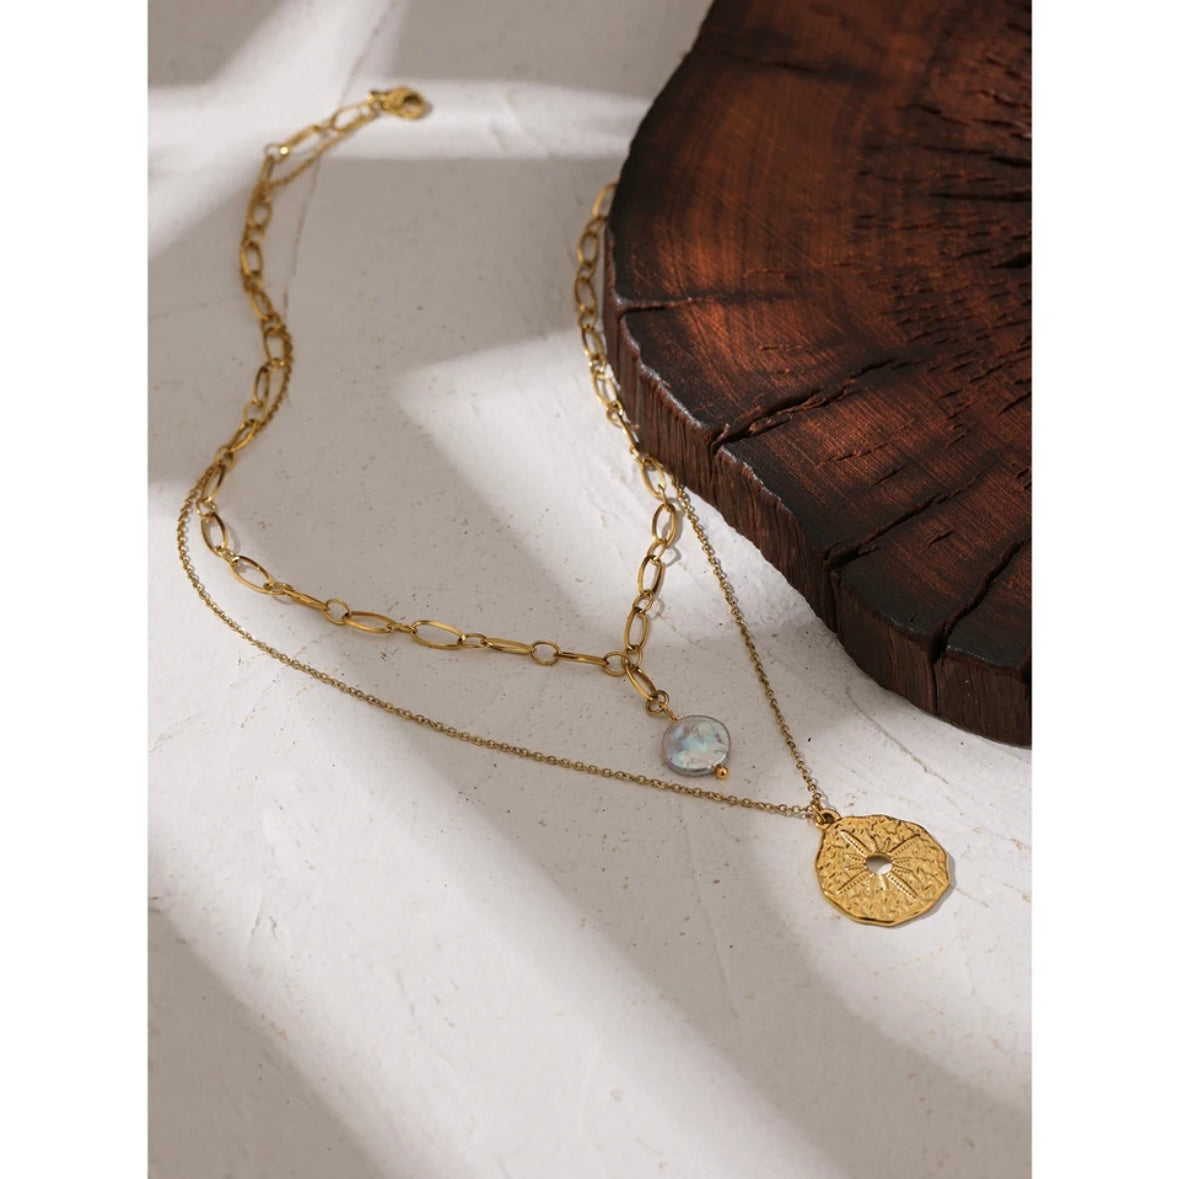 A smiling woman wearing a beautiful waterproof north star layered necklace, featuring a round pendant with a freshwater pearl charm, crafted from high-quality 18k gold plating